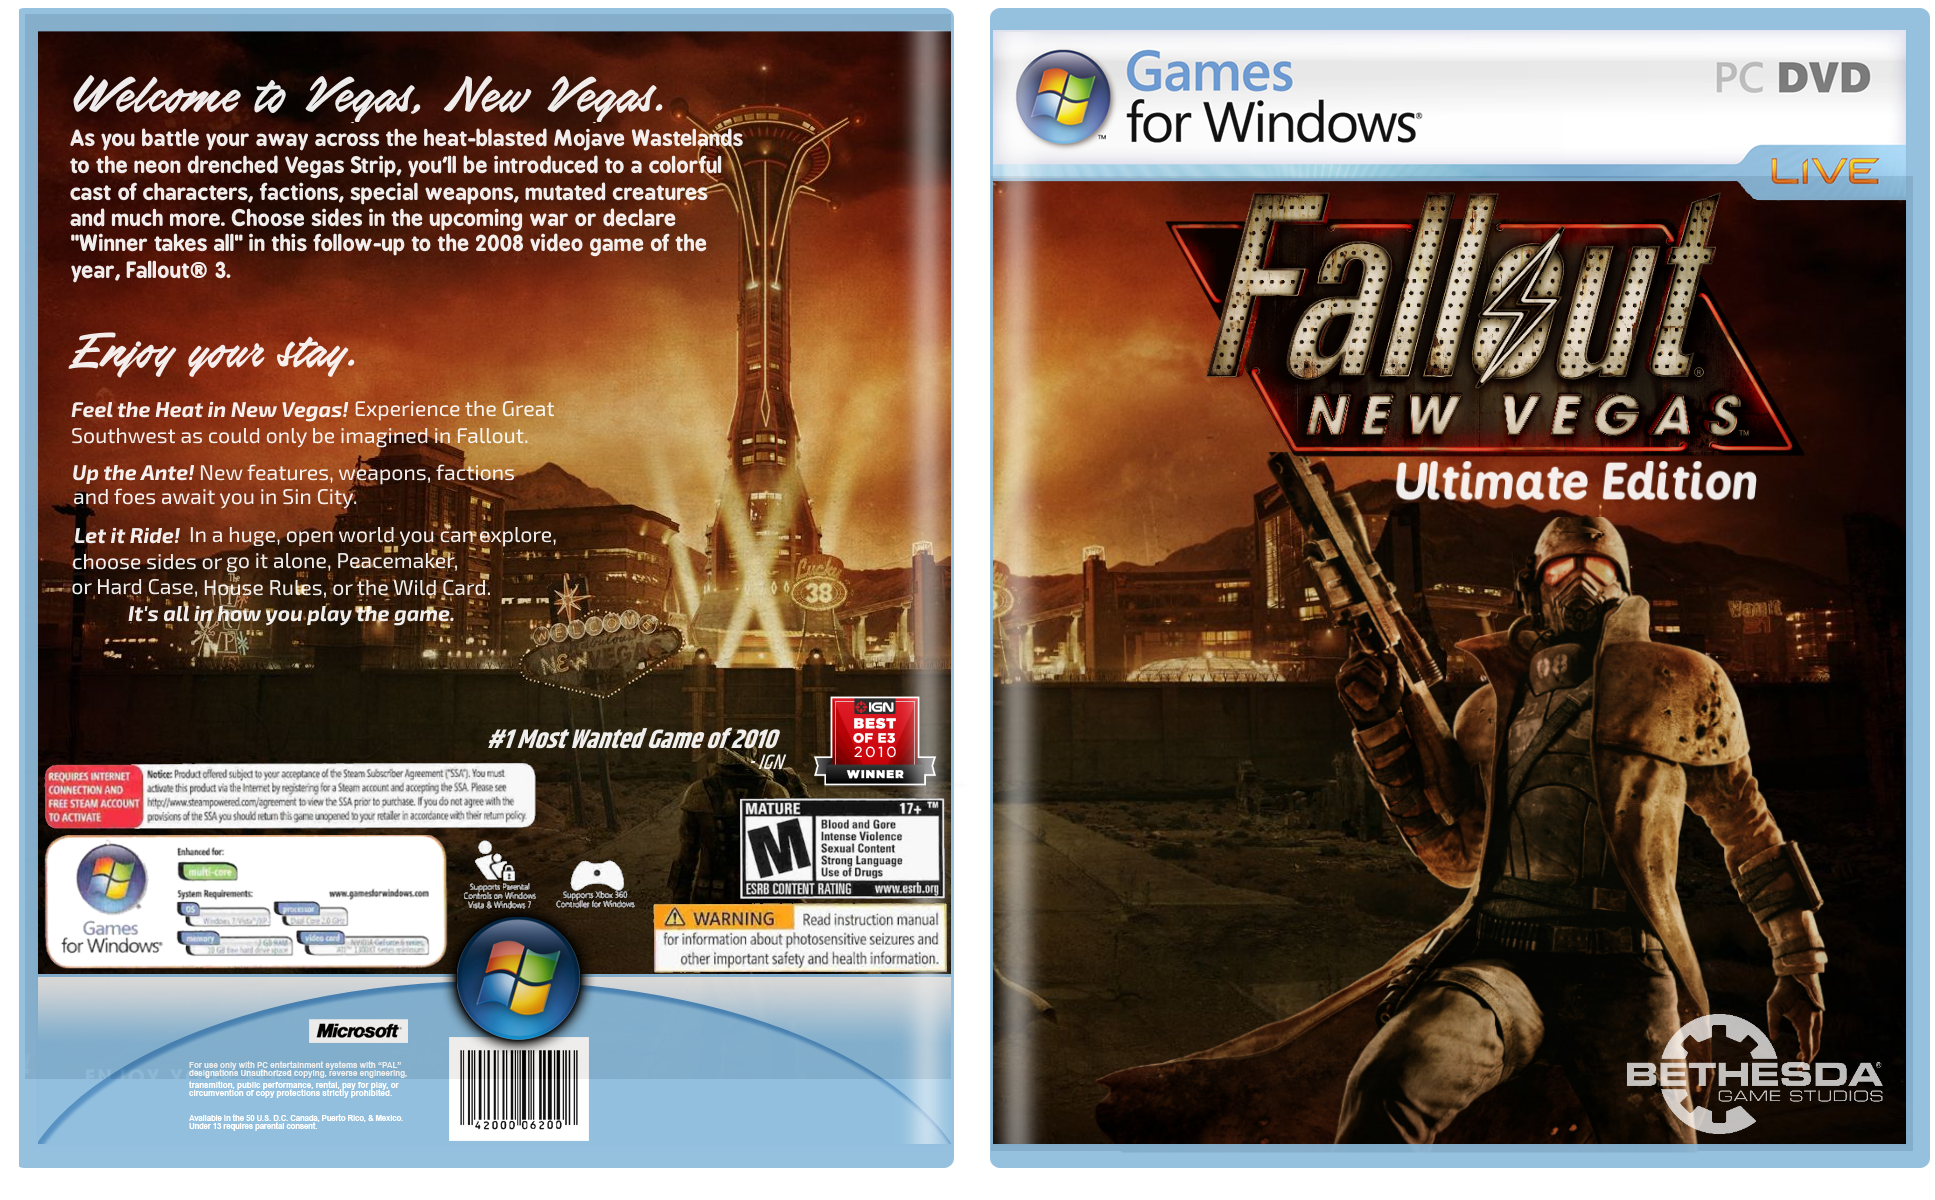 Fallout: New Vegas Ultimate Edition box cover